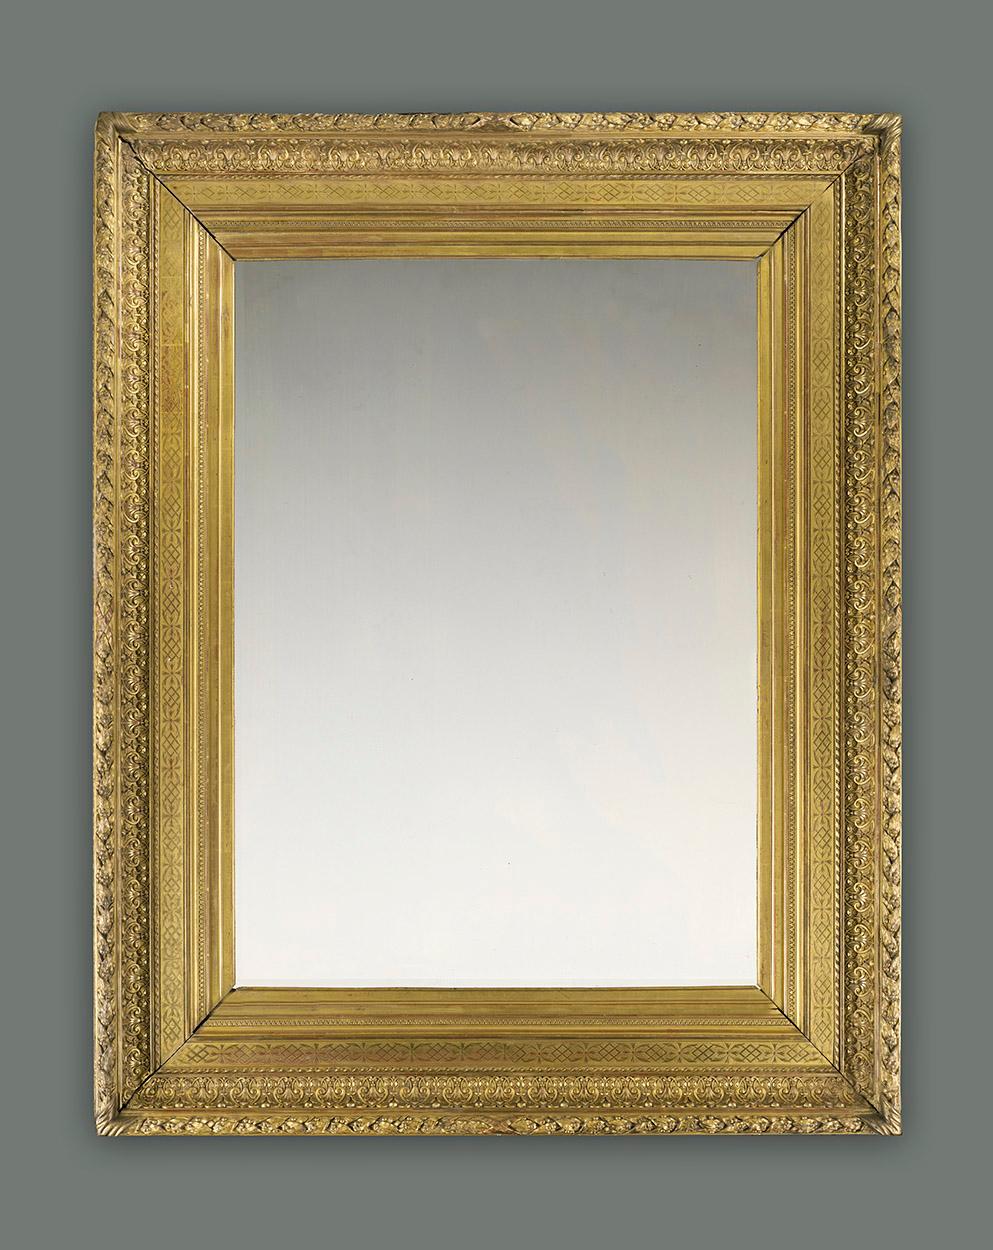 A very fine and rare 19th century French orientalist neoclassical salon frame. It has an entablature profile and the following ornament is applied in moulded Plaster of Paris: raie-de-coeur; frieze incised with burnished fretwork and foliage;